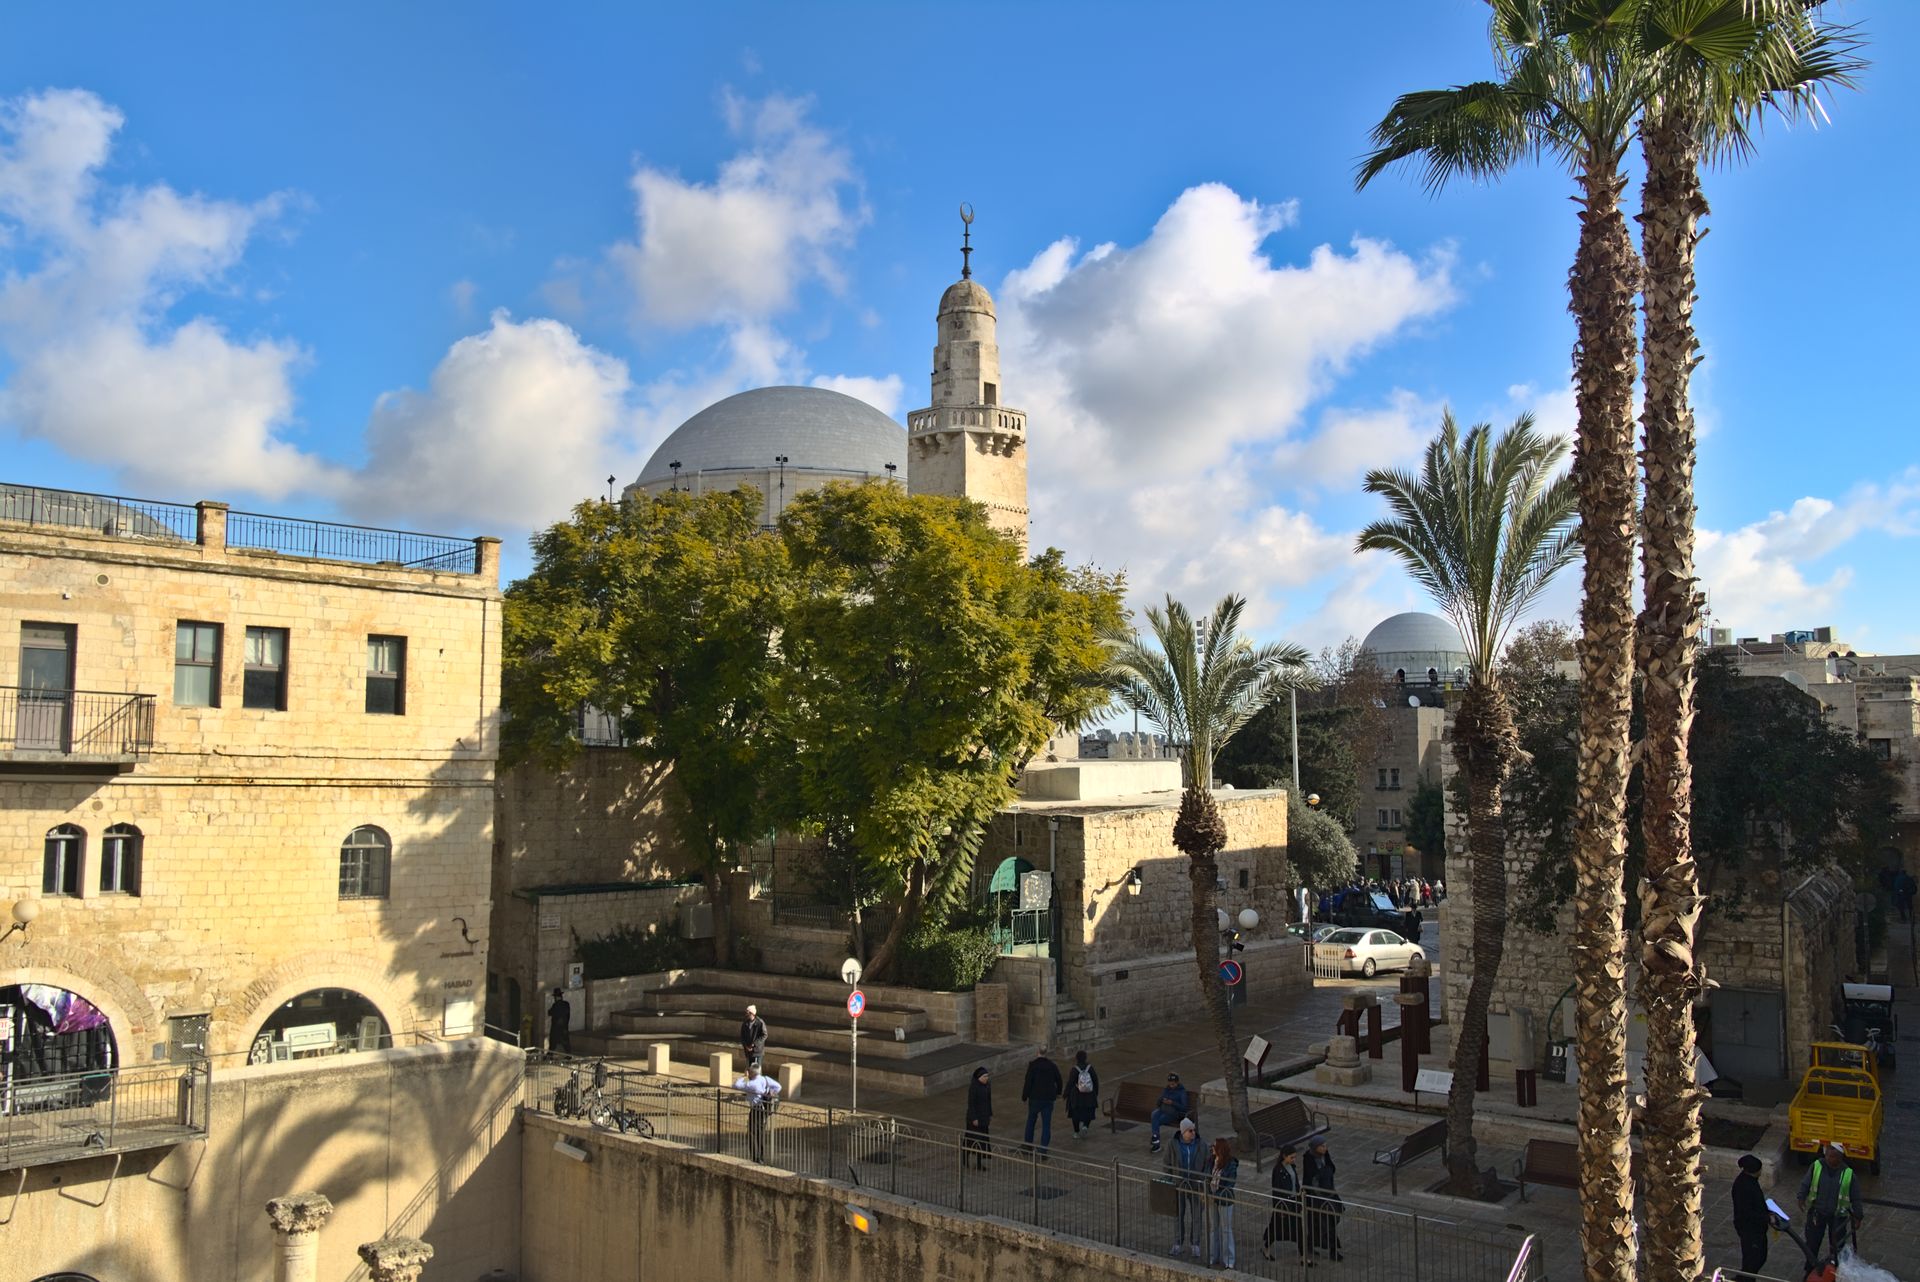 A square in the old town of Jerusalem with a Synagogue towering over it in the Background.